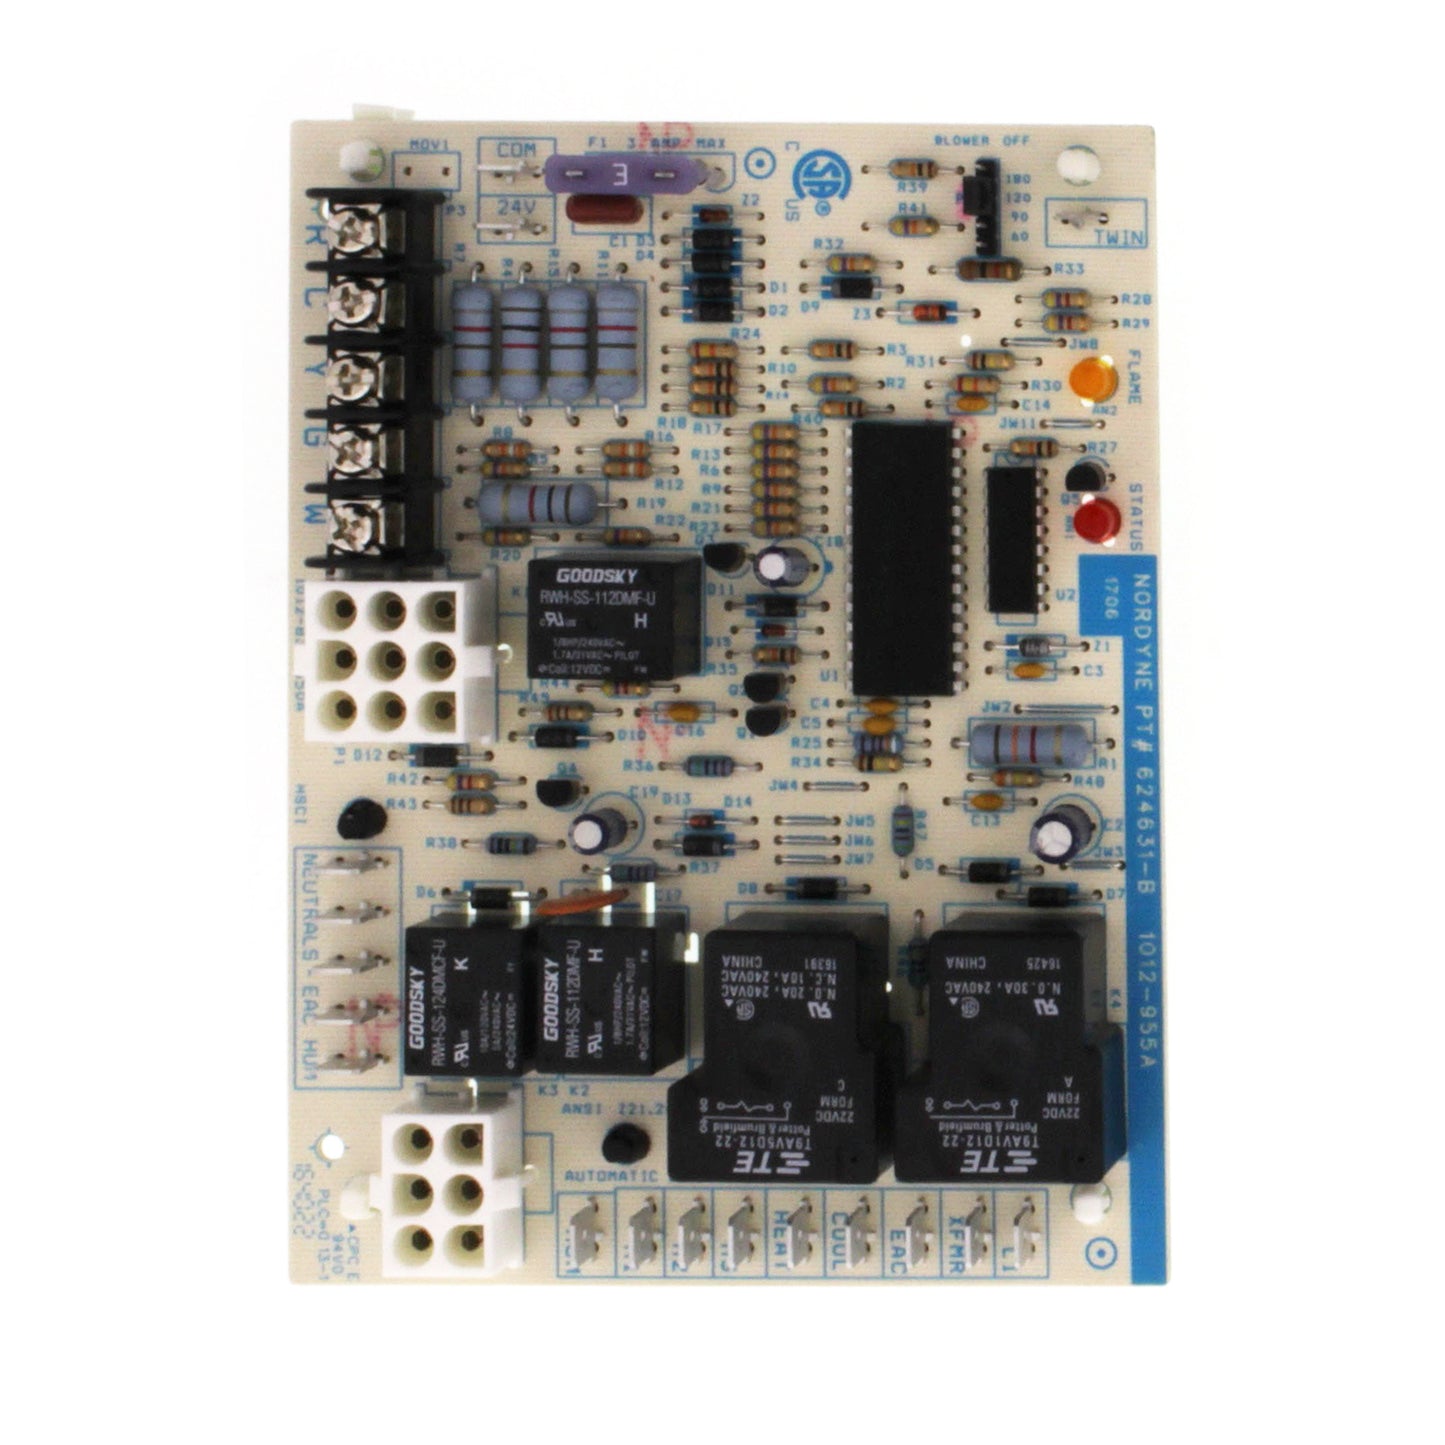 903106 - Furnace Control Board for G3/G4/G5/G6/L1RA